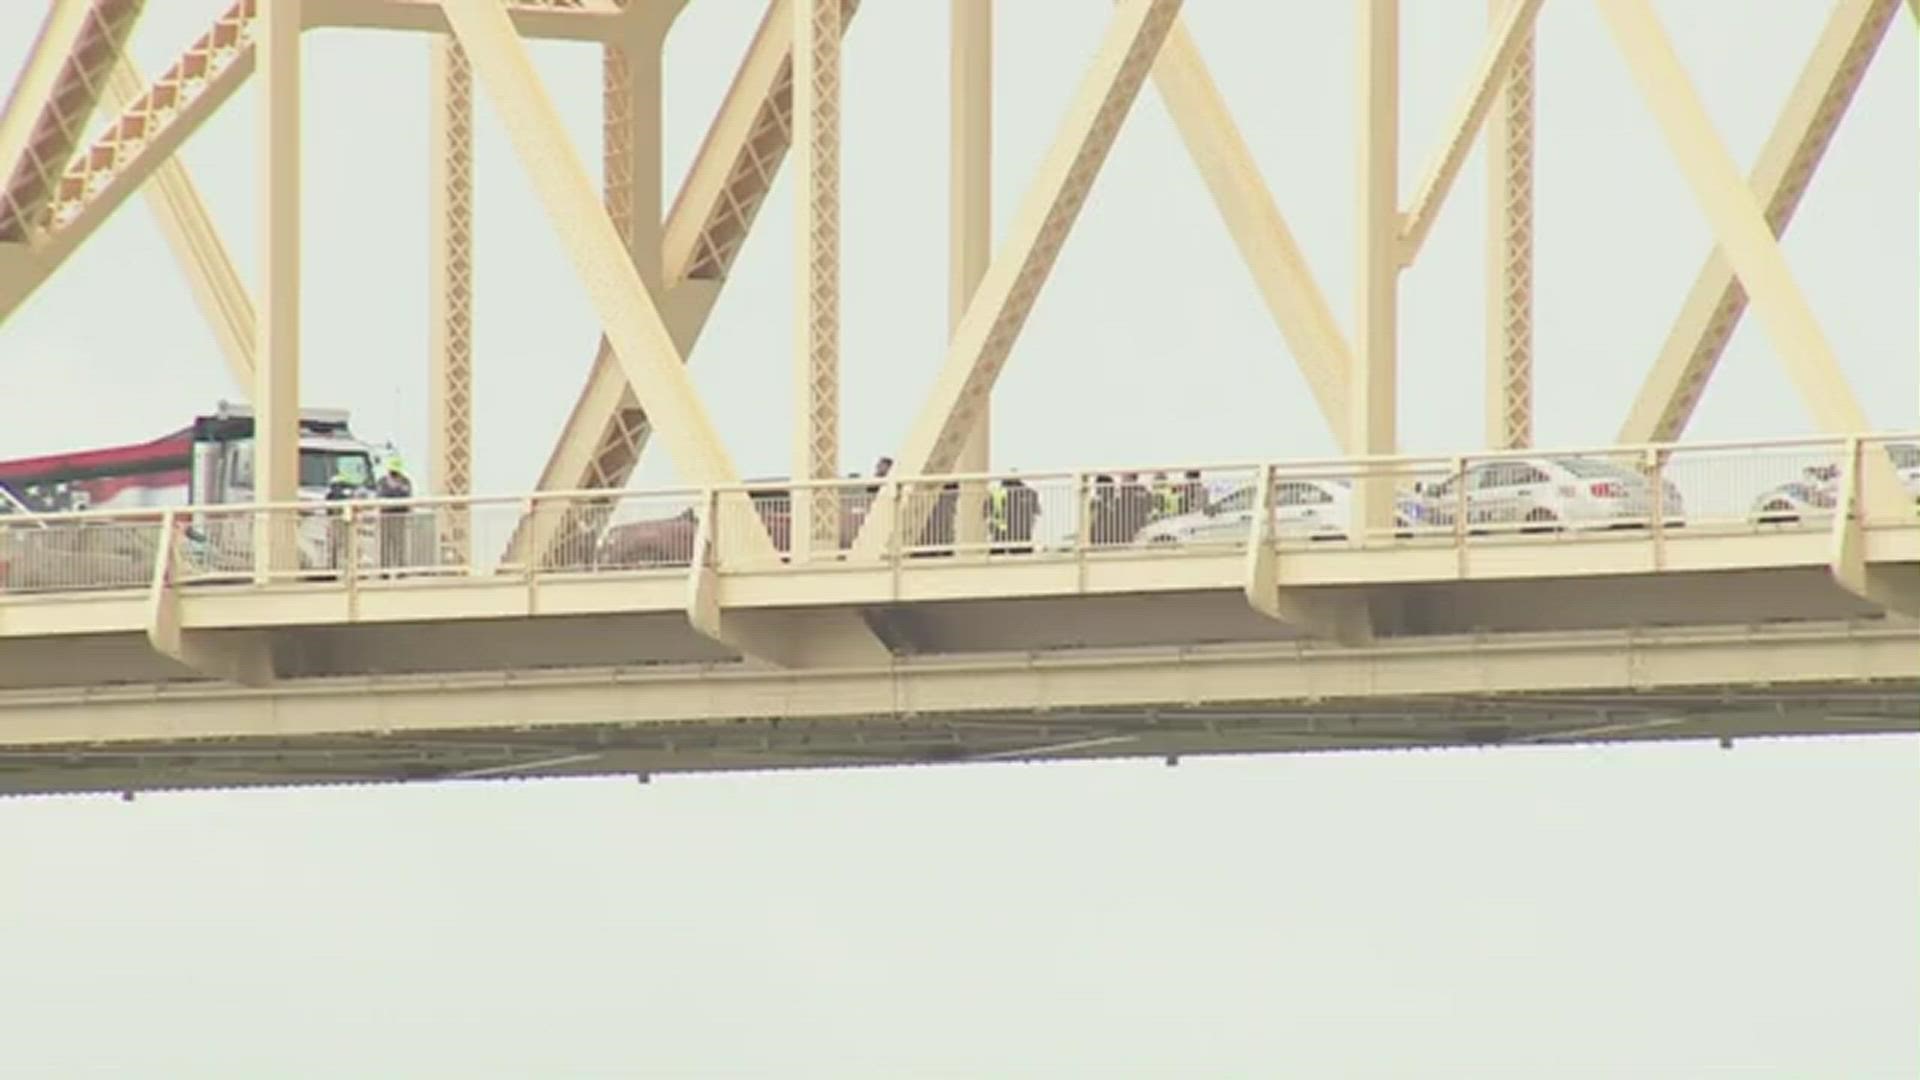 Protesters arrested after shutting down the Clark Memorial Bridge Monday morning, hanging a banner showing Breonna Taylor on the side of the bridge.